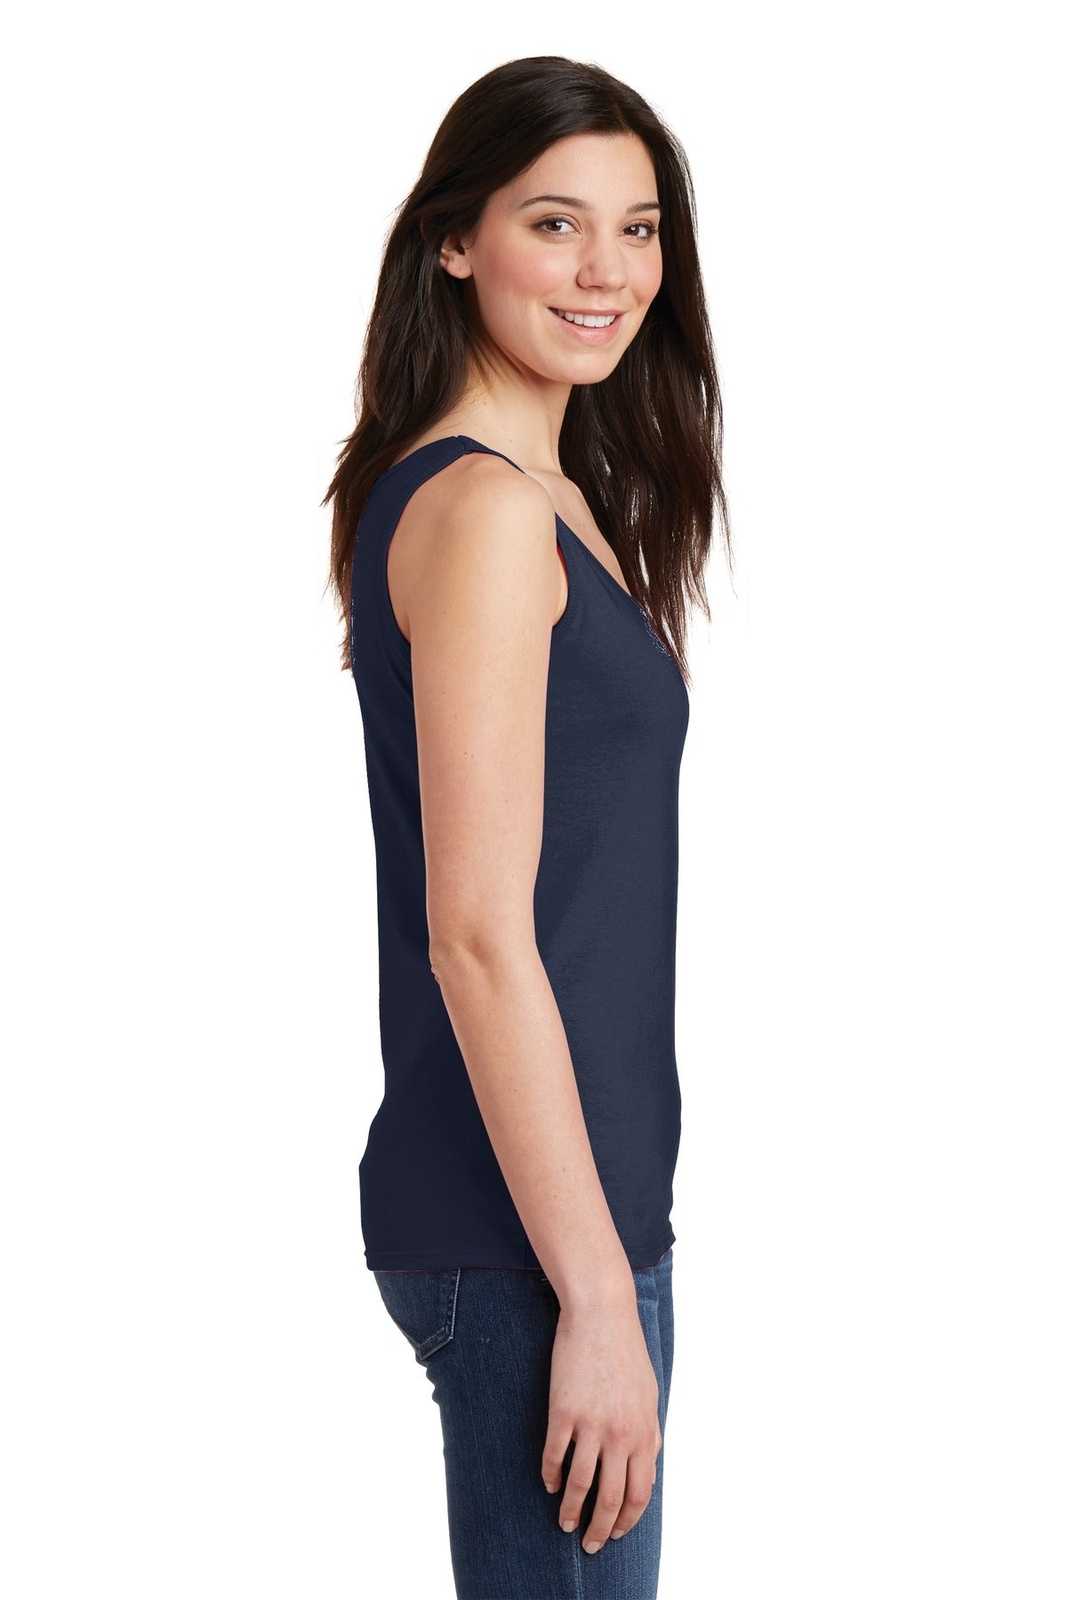 Gildan 64200L Softstyle Junior Fit Tank Top - Navy - HIT a Double